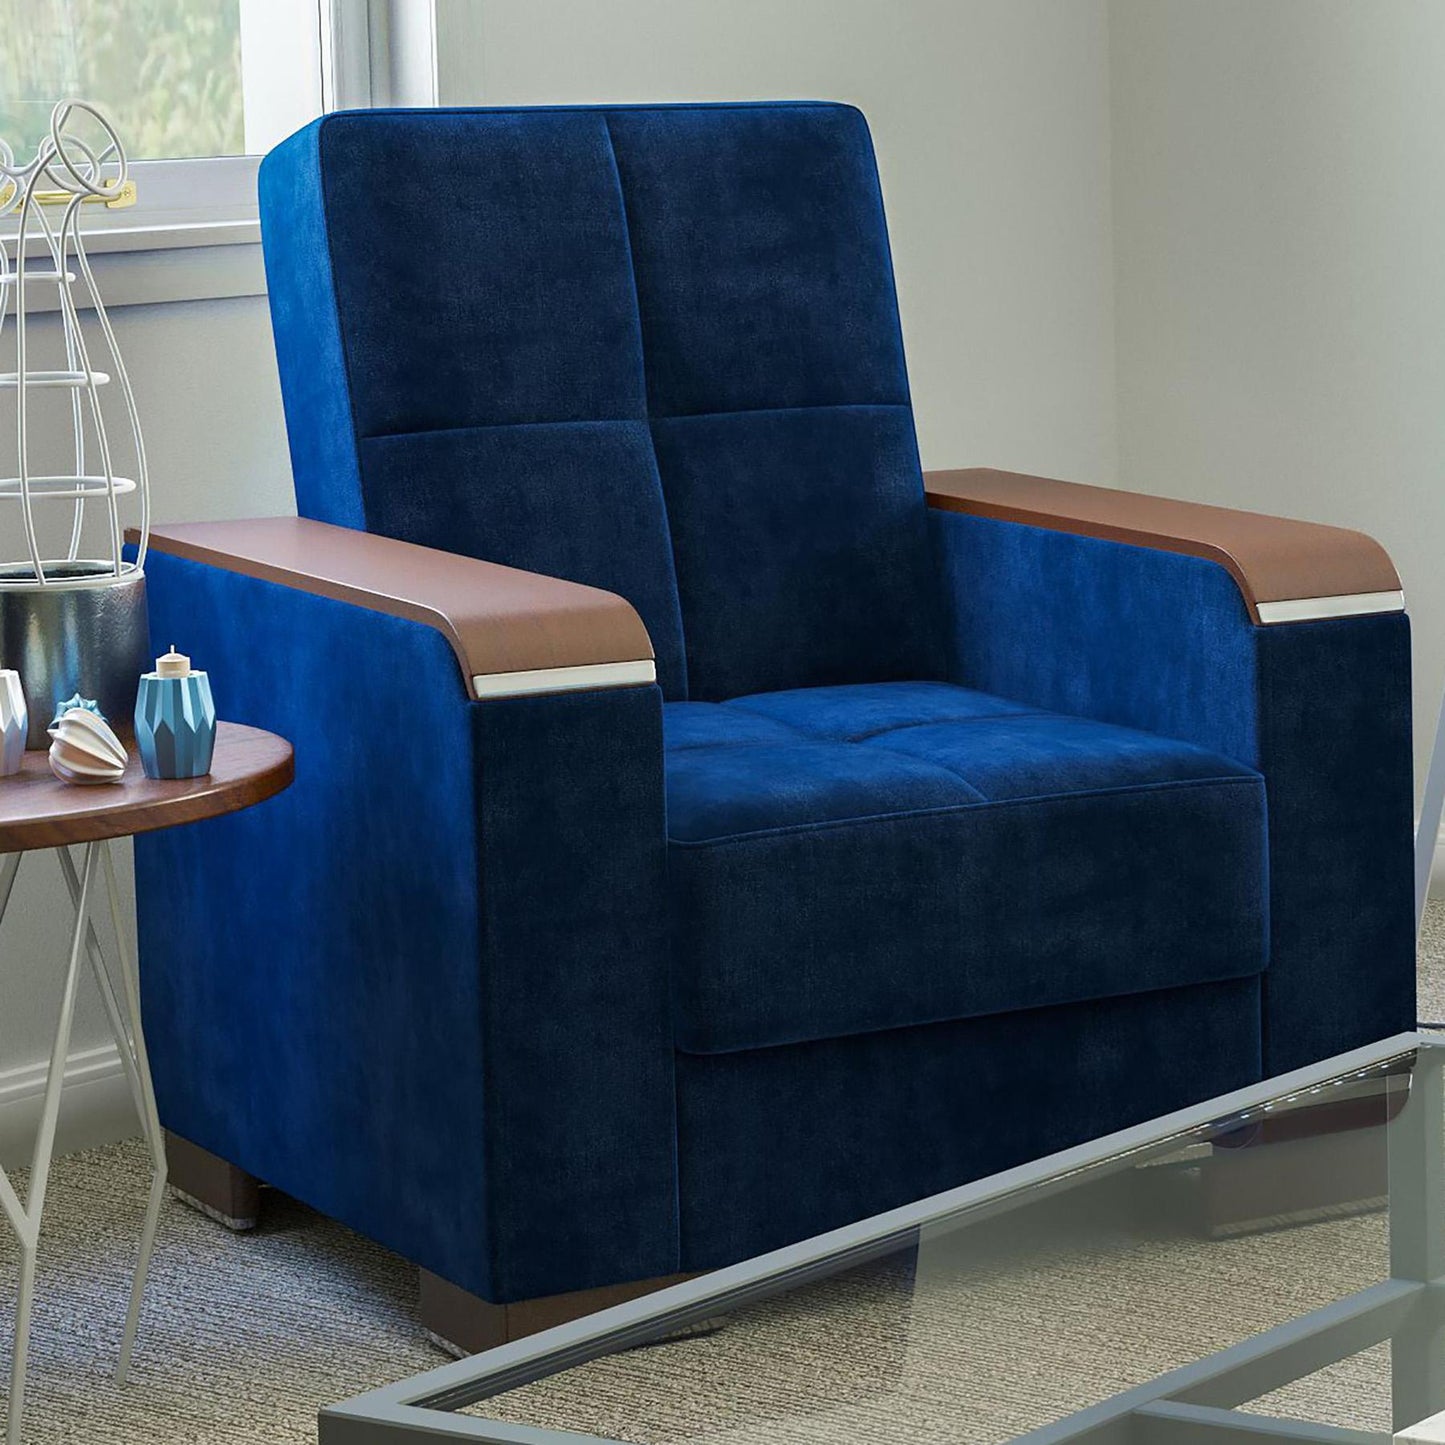 Modern design, True Blue , Microfiber upholstered convertible Armchair with underseat storage from Voyage Luxe by Ottomanson in living room lifestyle setting by itself. This Armchair measures 38 inches width by 36 inches depth by 41 inches height.